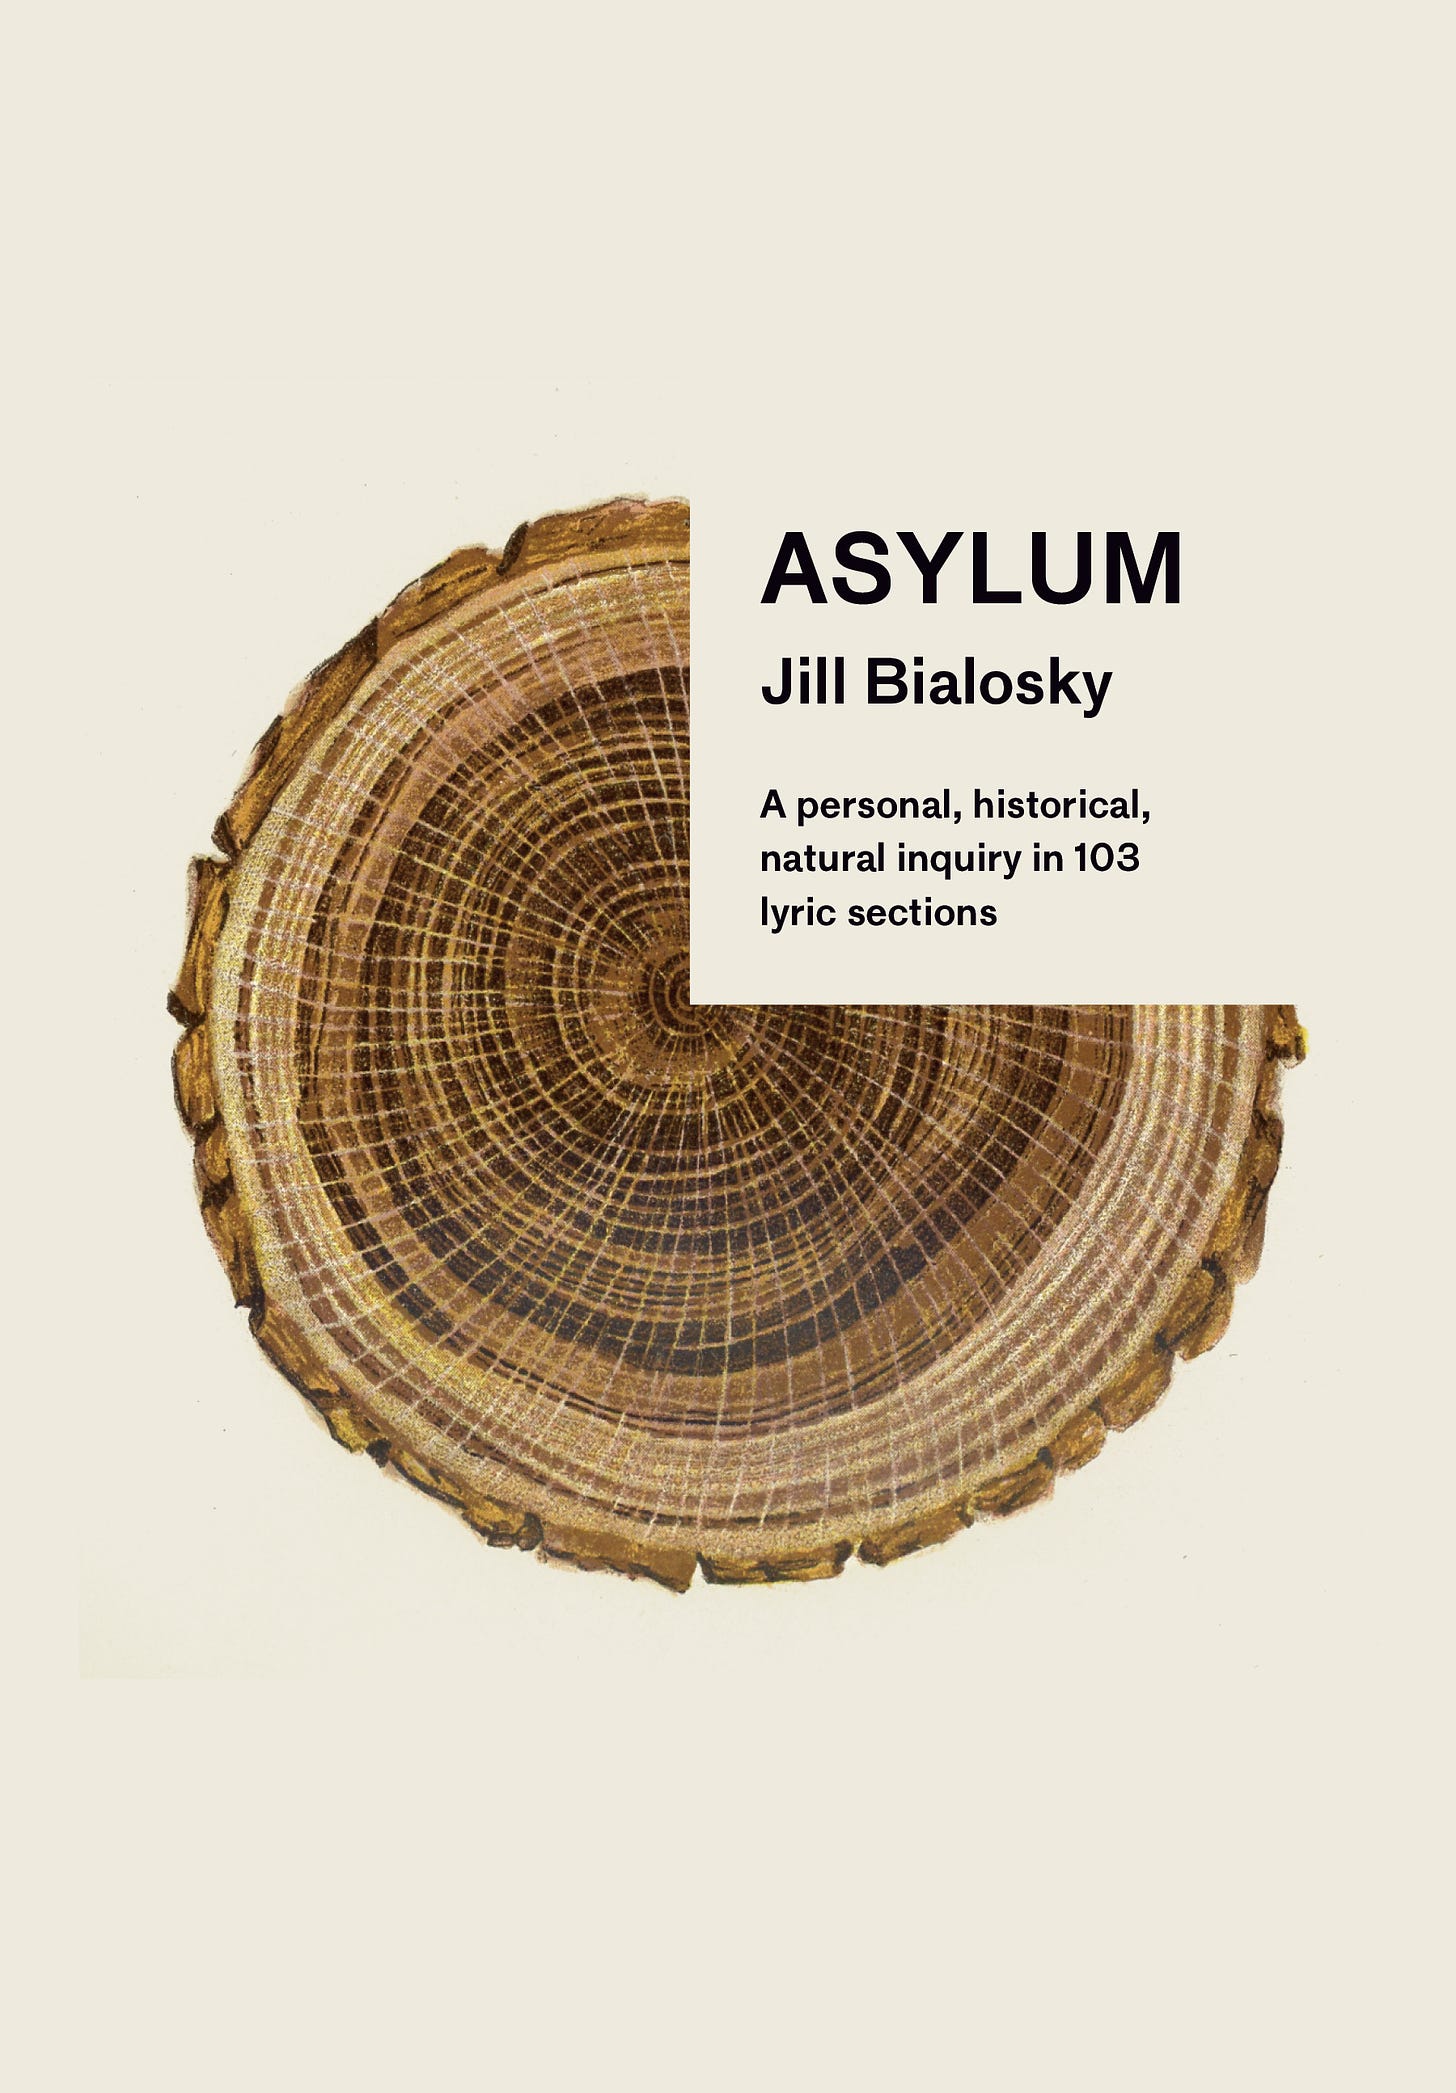 This is the cover of Asylum by Jill Bialosky